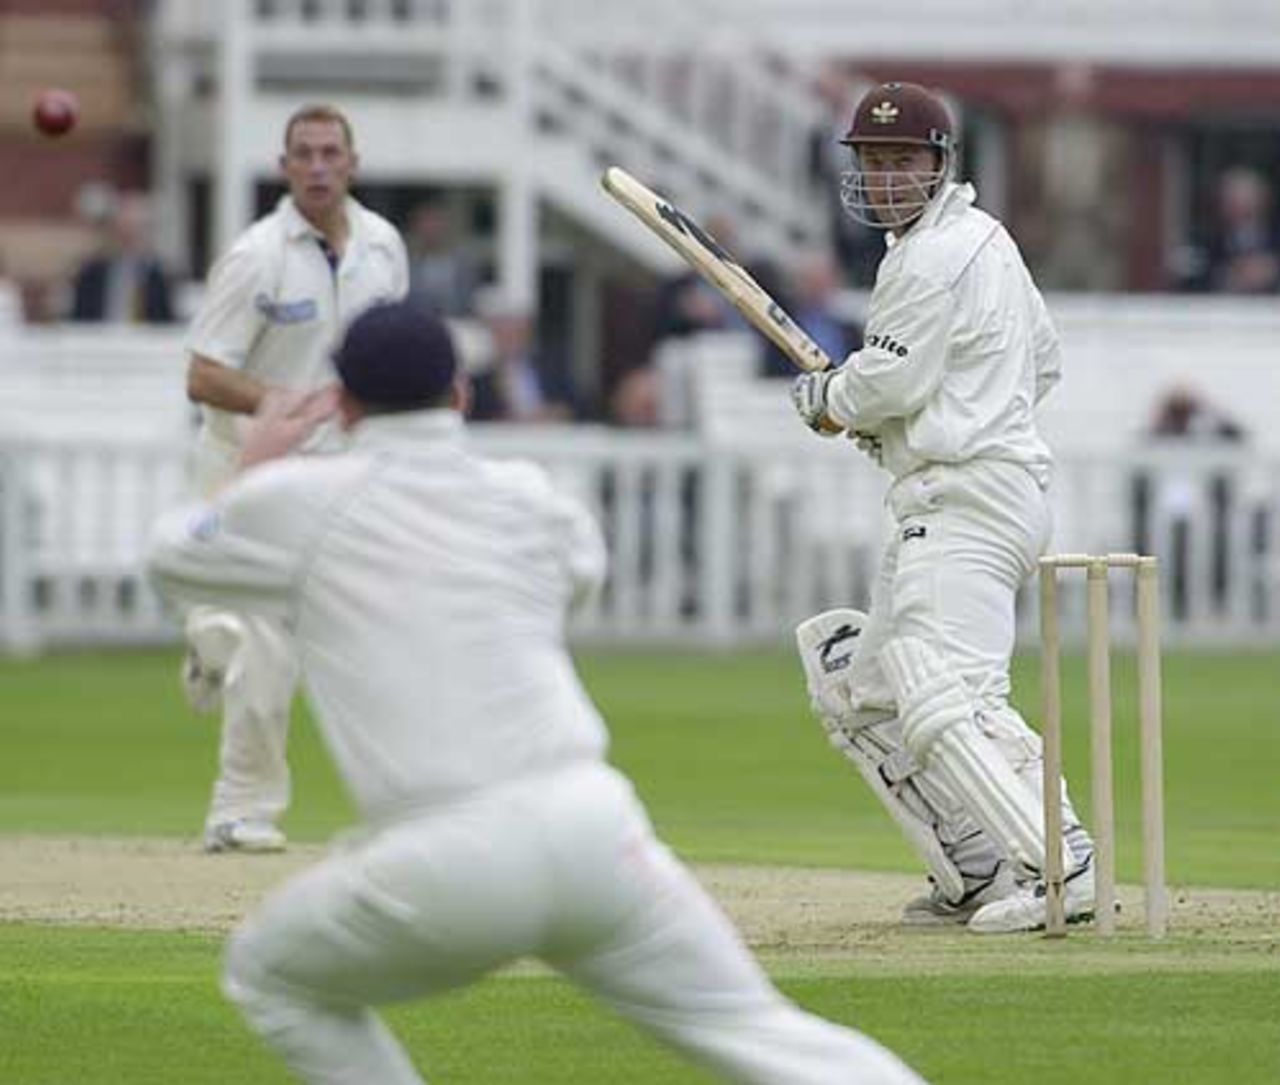 Gloucs v Surrey, Benson and Hedges Cup Final, Lord's, 14 July 2001